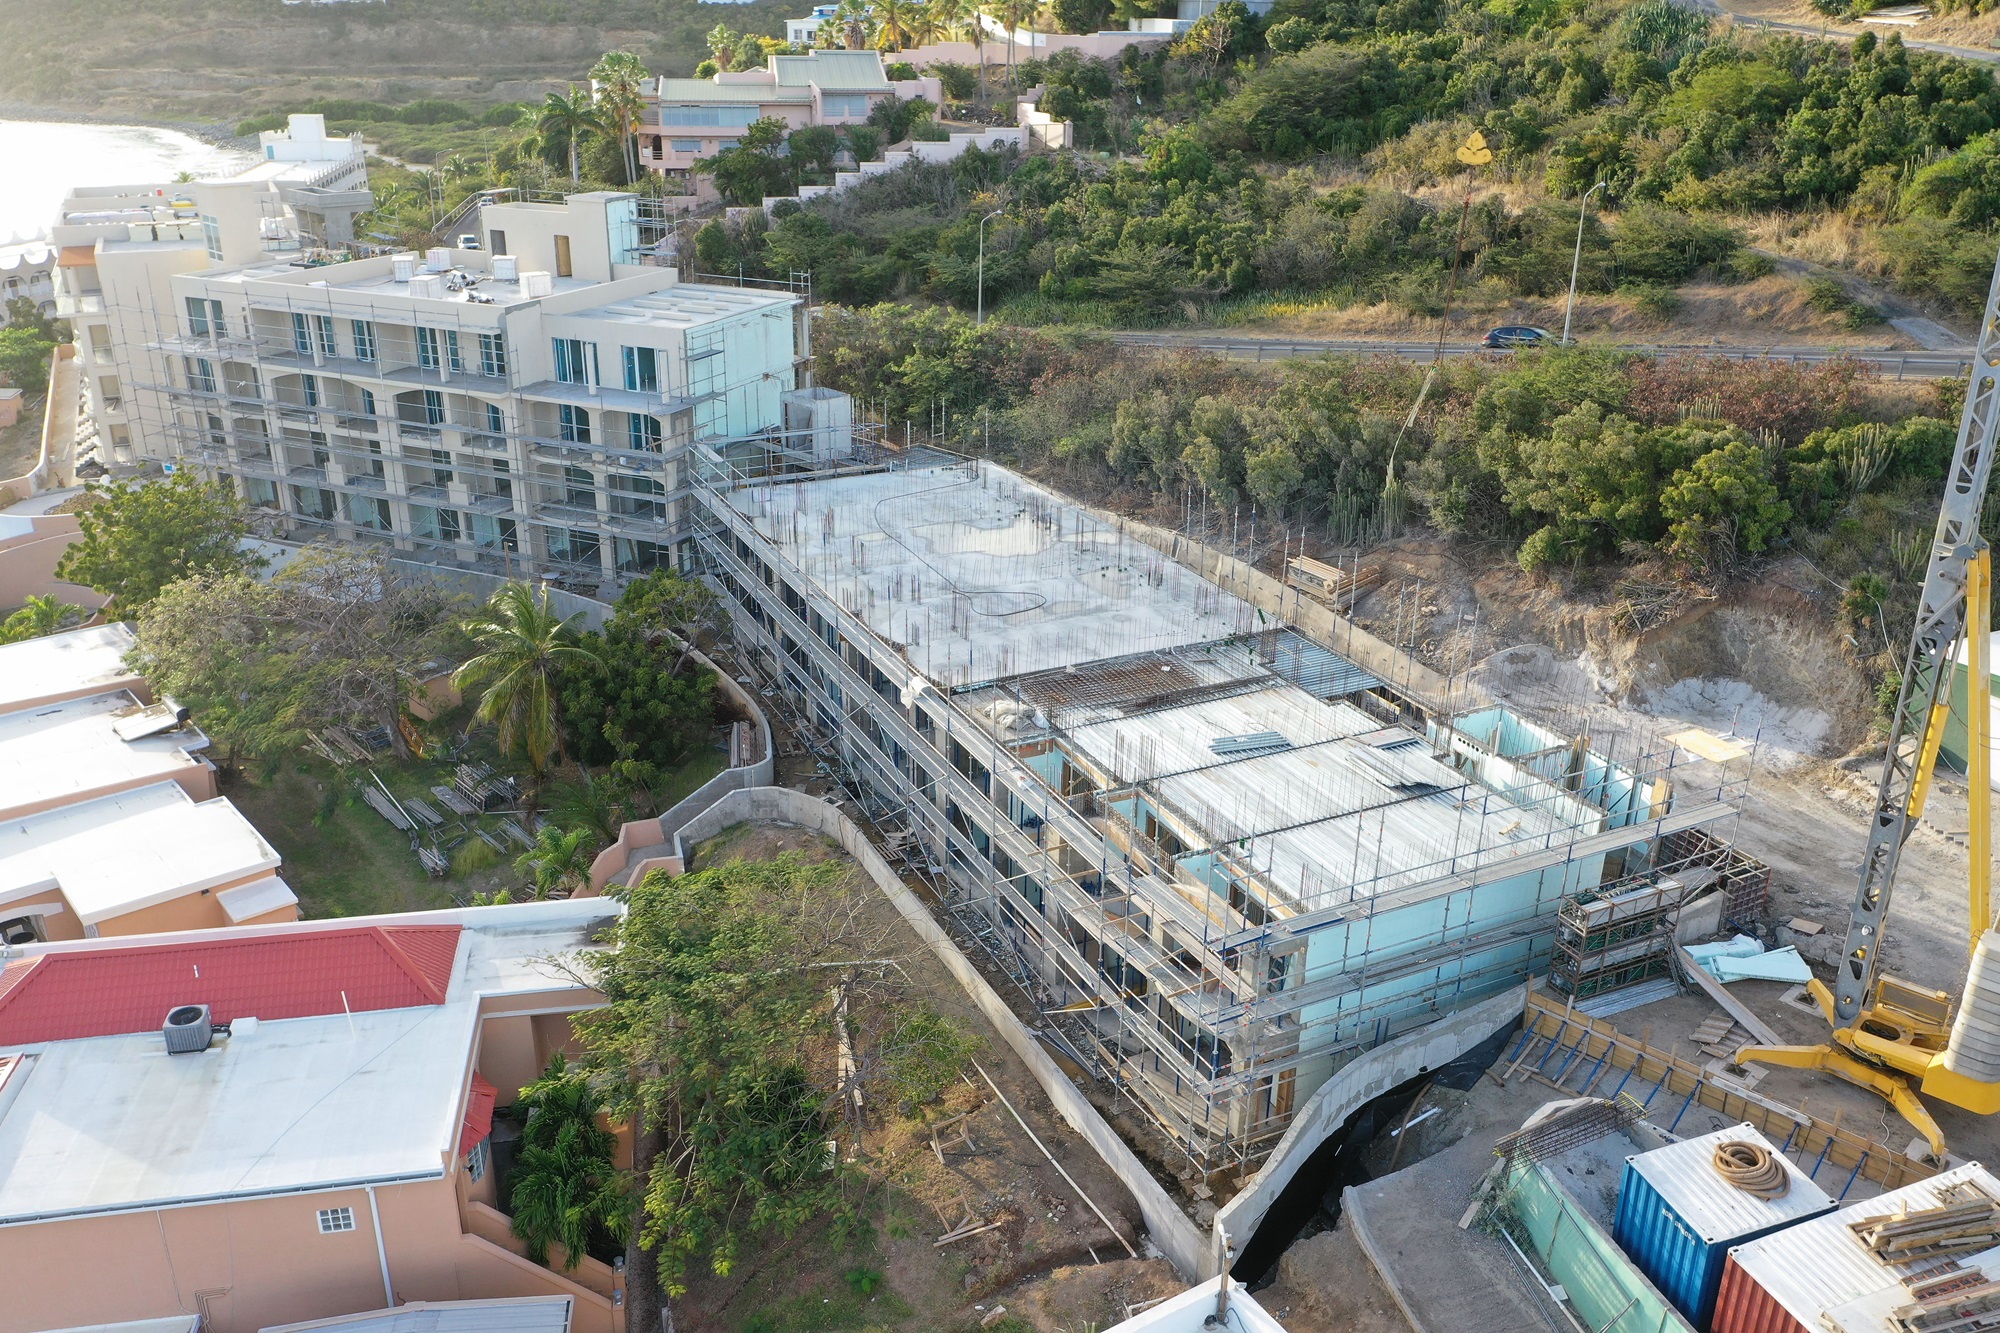 Revolutionizing Construction with the Use of Nudura ICFs at Divi Little Bay Beach Resort